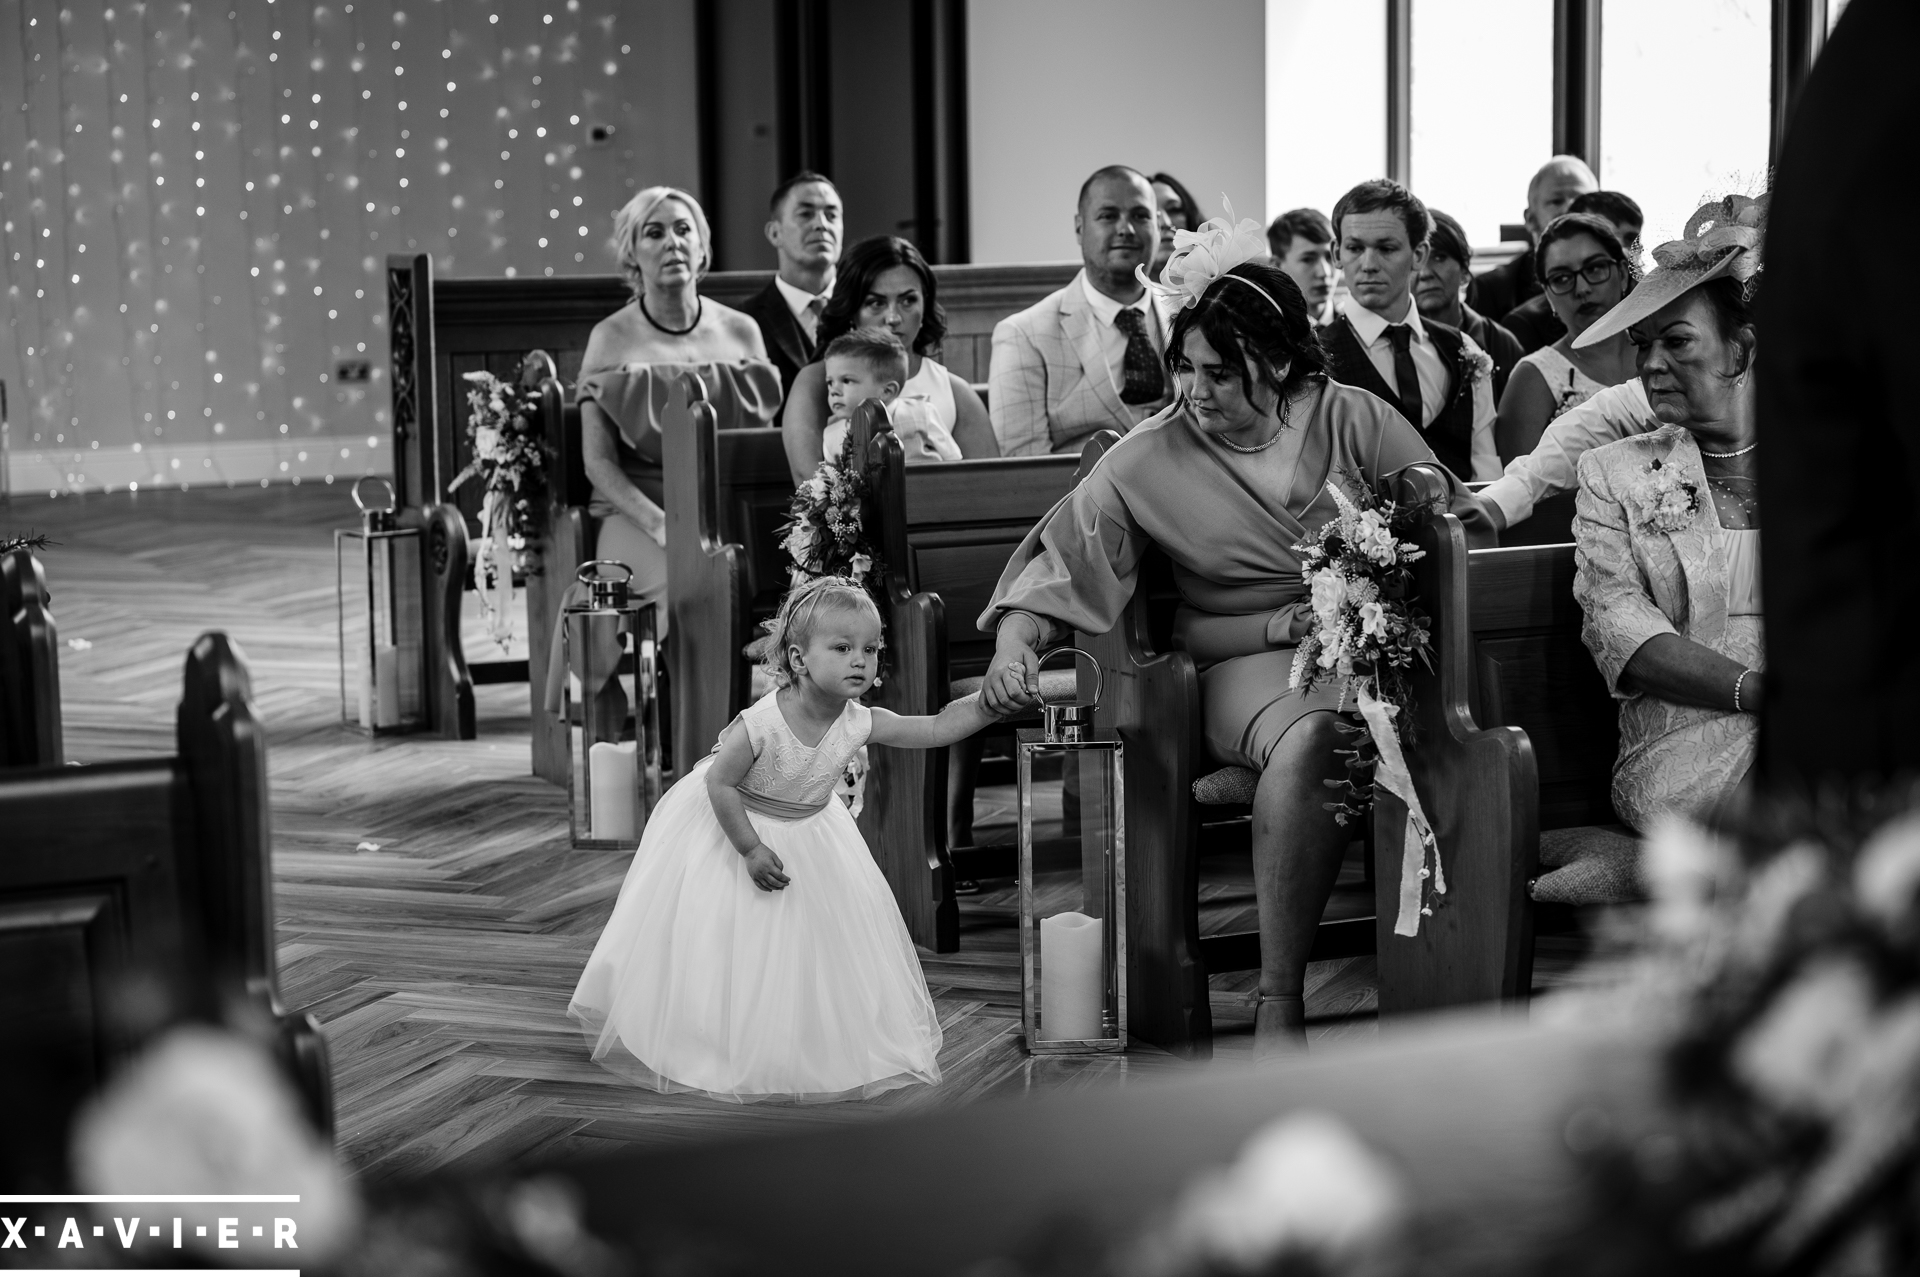 flowergirl leaves her seat during the ceremony